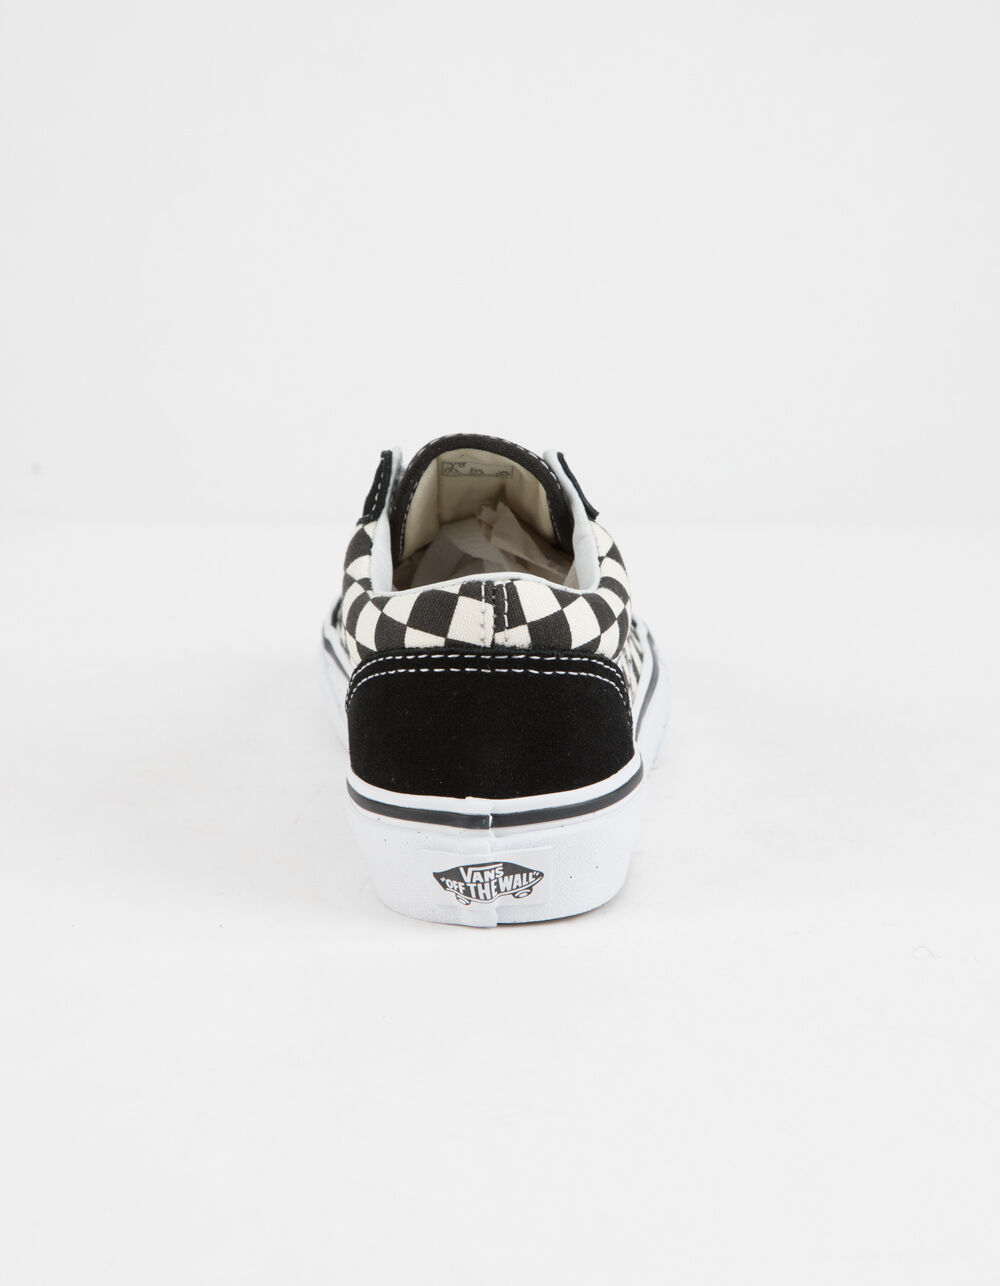 VANS Checkerboard Check Old Skool & White Kids Shoes - CHECK | Tillys